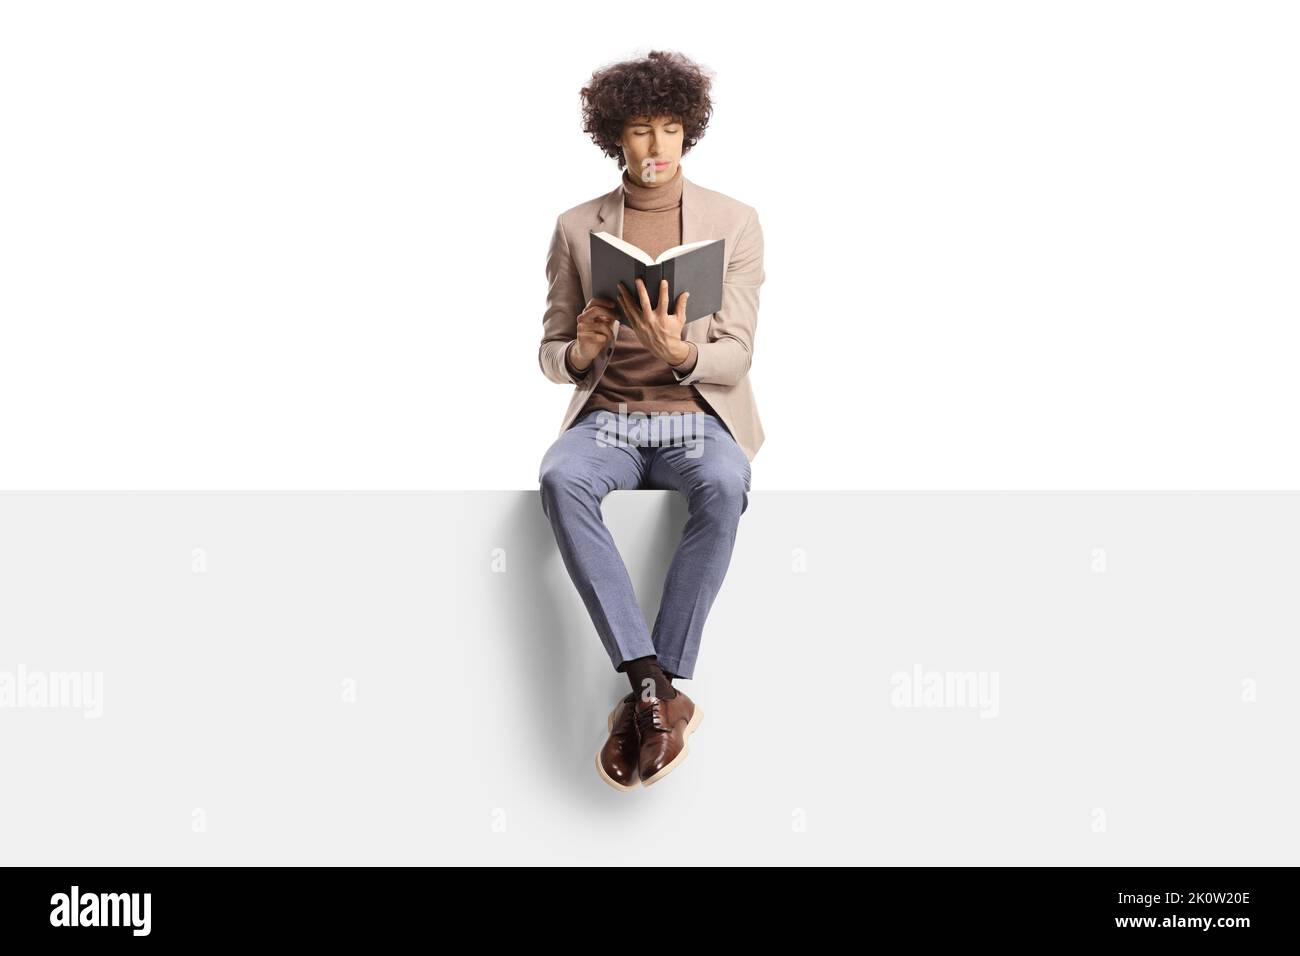 Elegant young man with curly hair sitting on a panel and reading a book isolated on white background Stock Photo